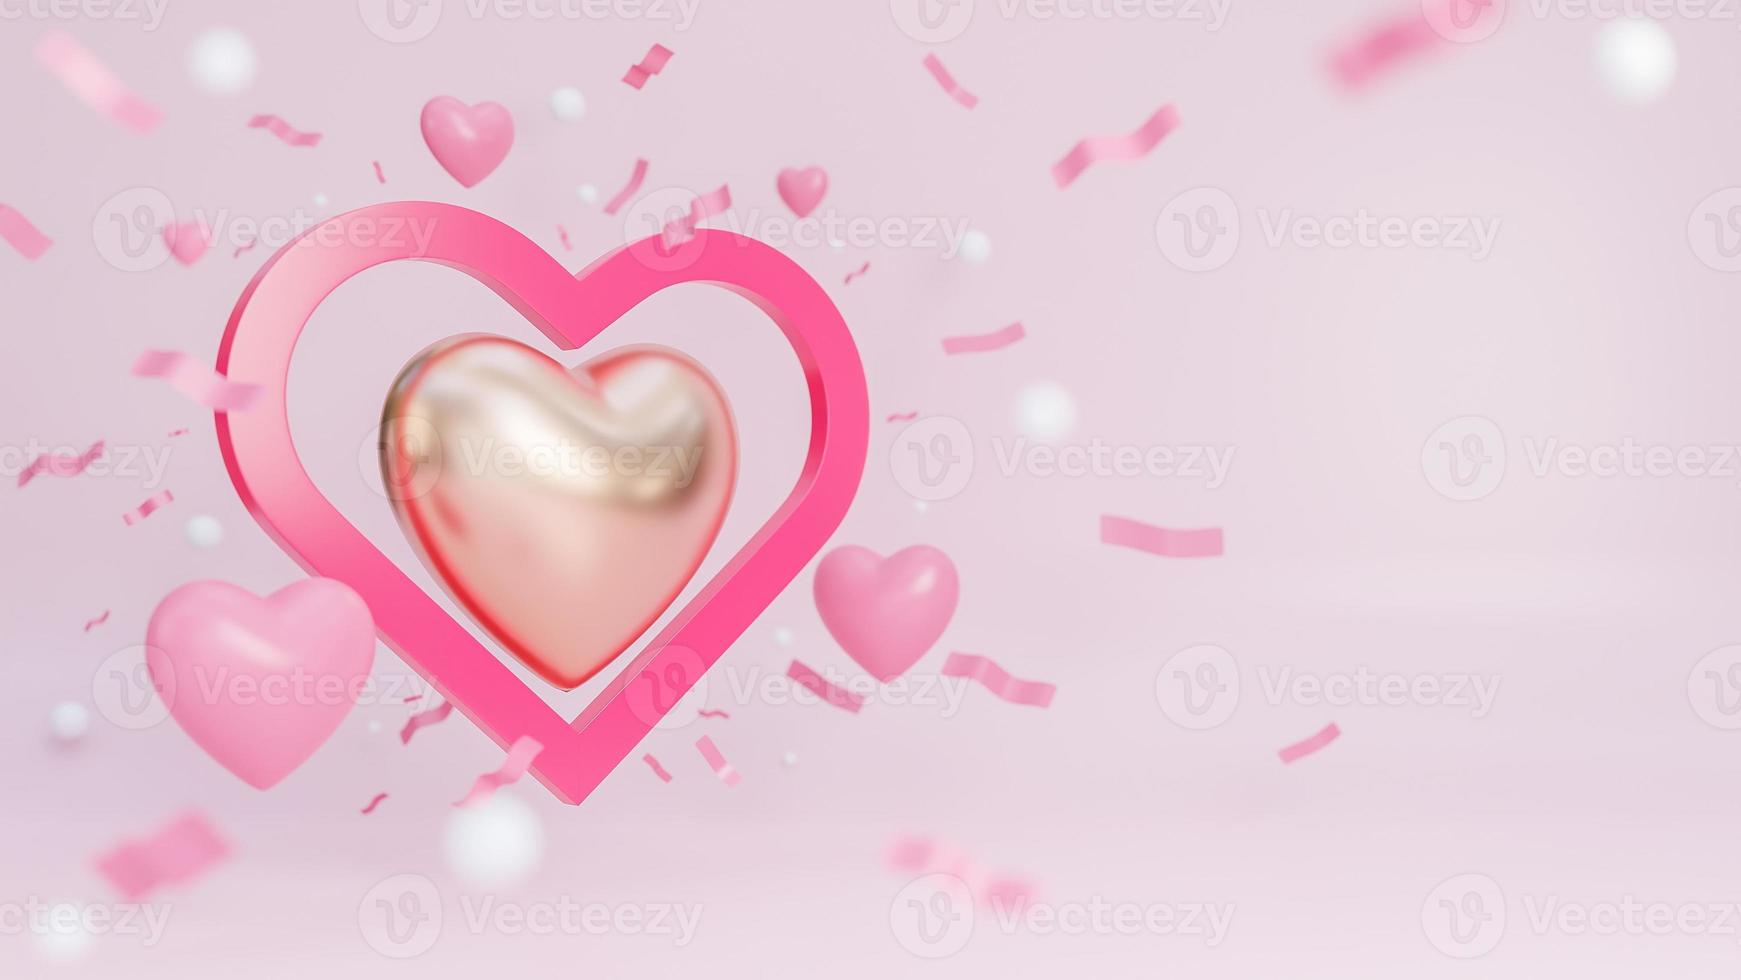 Happy valentine day banner with many hearts and golden heart on pink background.,3d model and illustration. photo